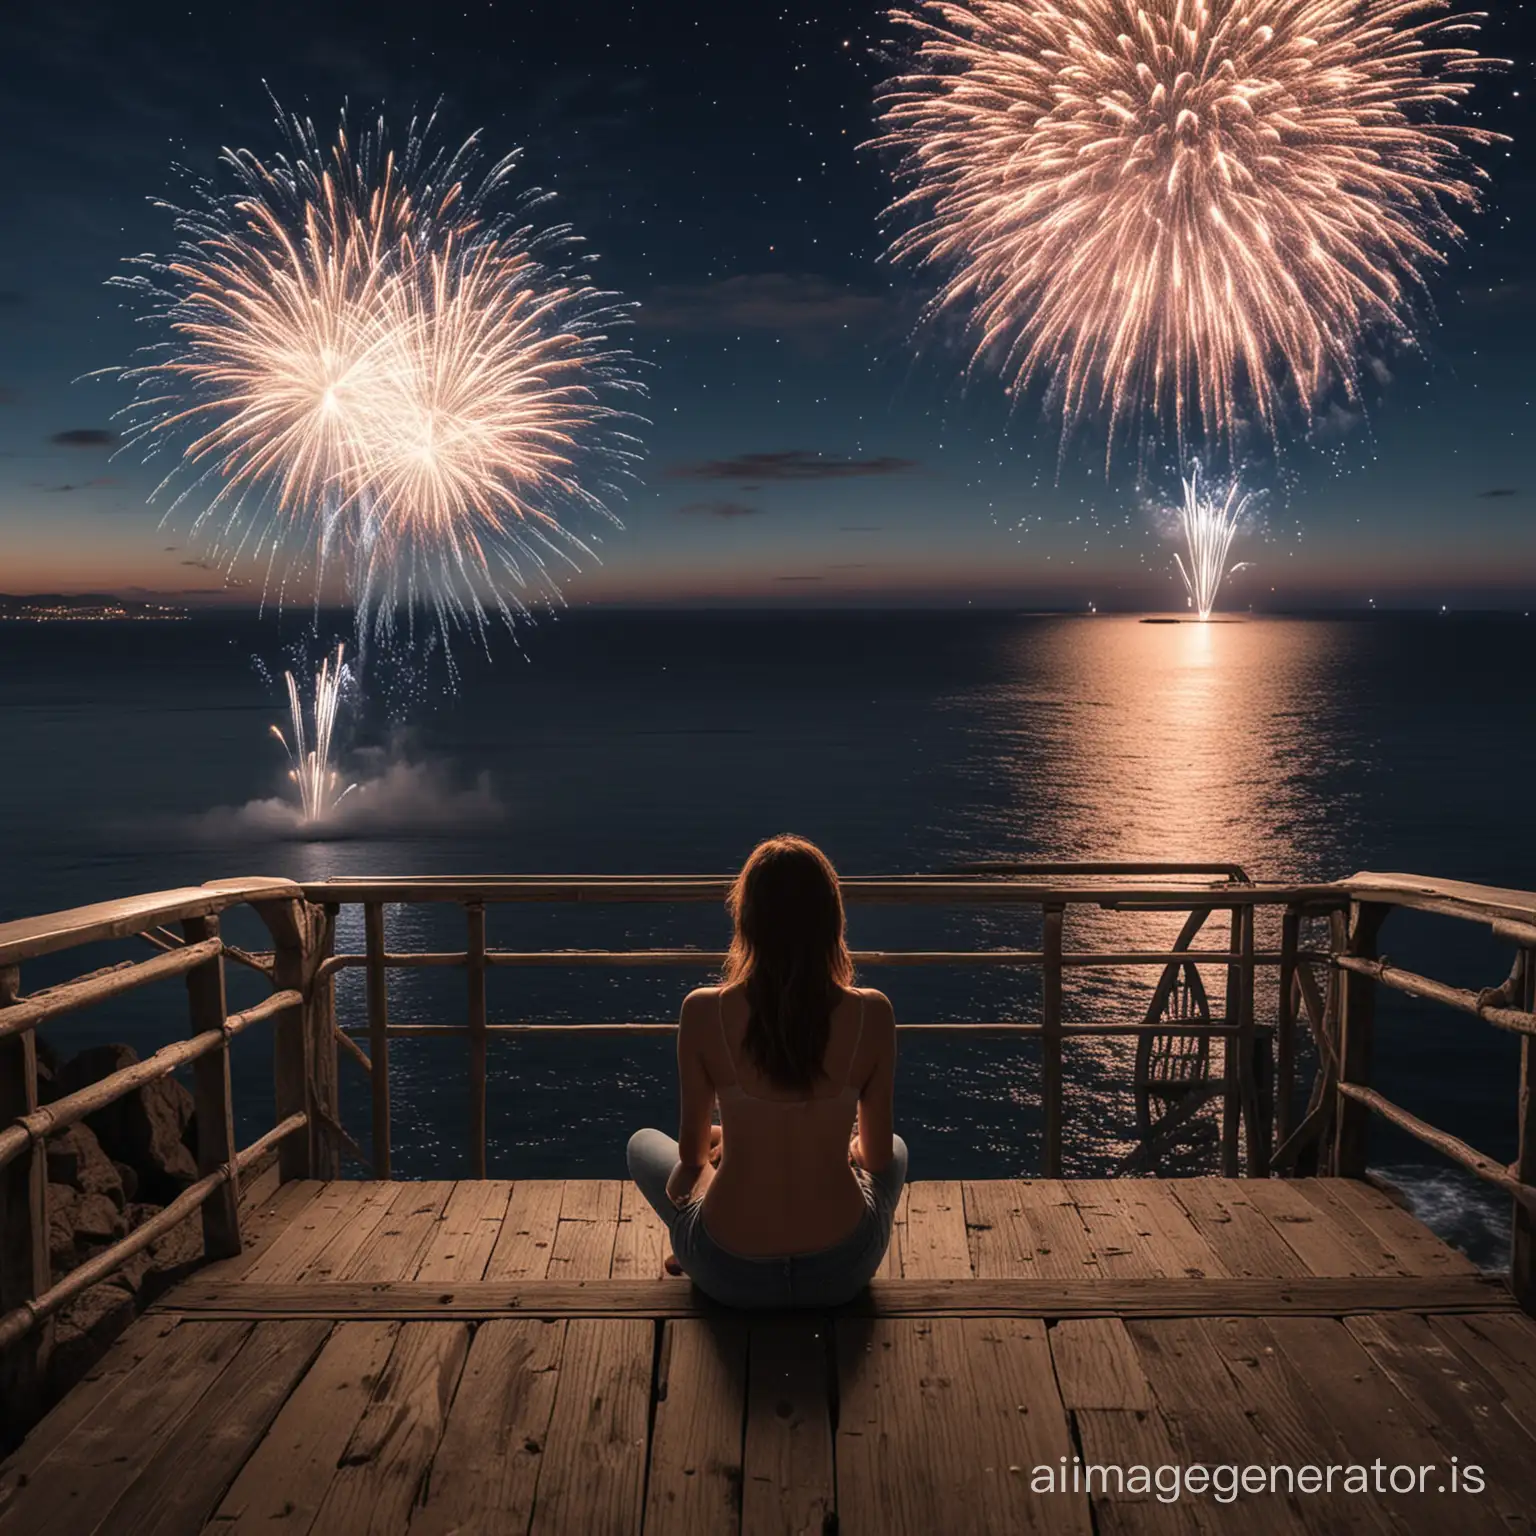 Awoman is sitting on bridge,down by the sea in front of a breathing view,fireworks in the sky